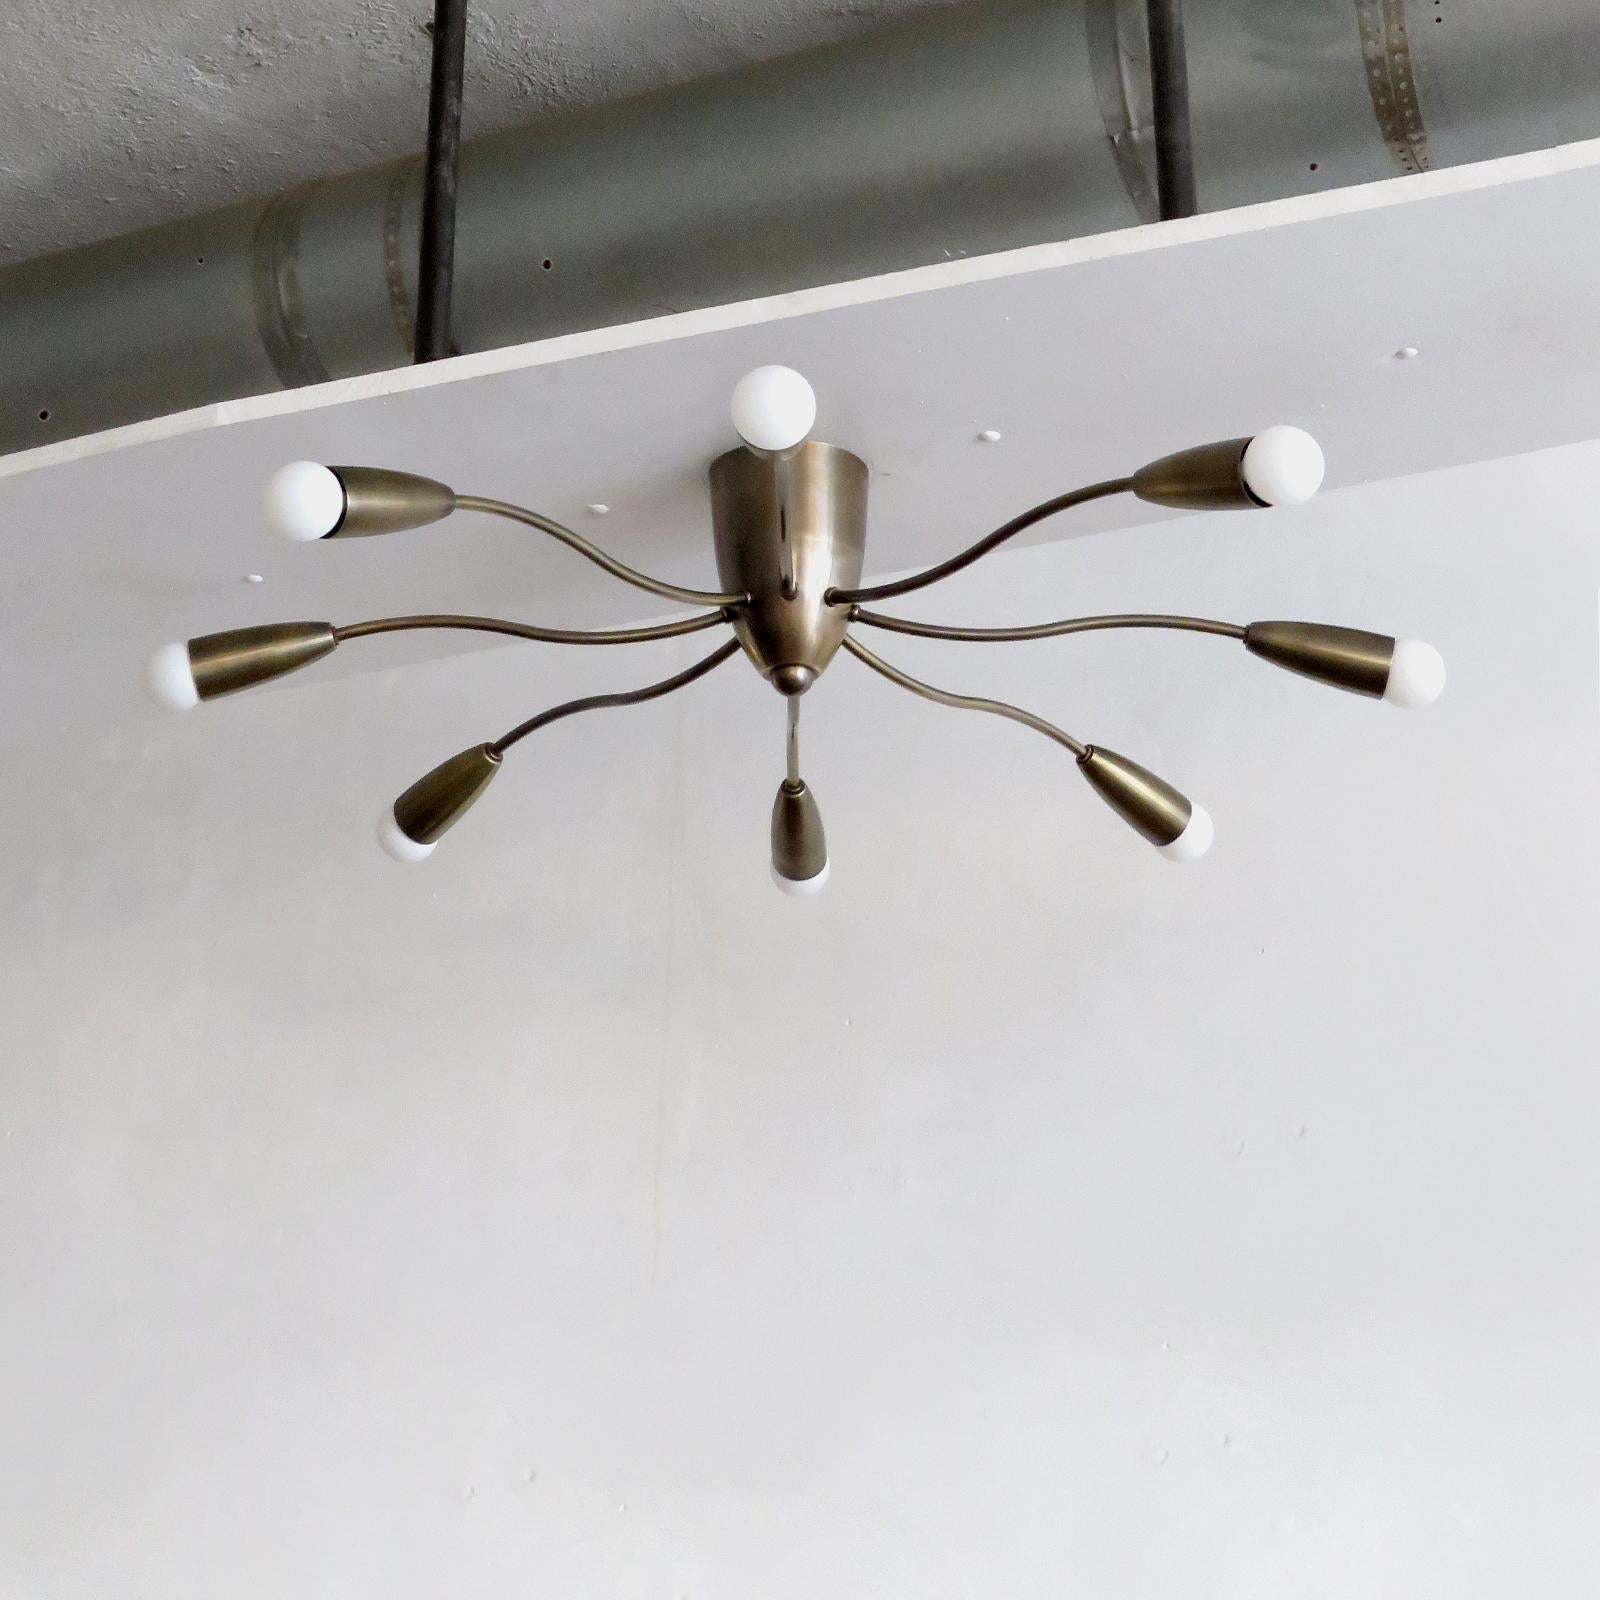 Elegant Aura-30 flushmount ceiling light in aged brass finish designed by Gallery L7, handcrafted and finished in Los Angeles from American brass. Eight E12 sockets per fixture, max. wattage 25w each, wired for US standards or European standards